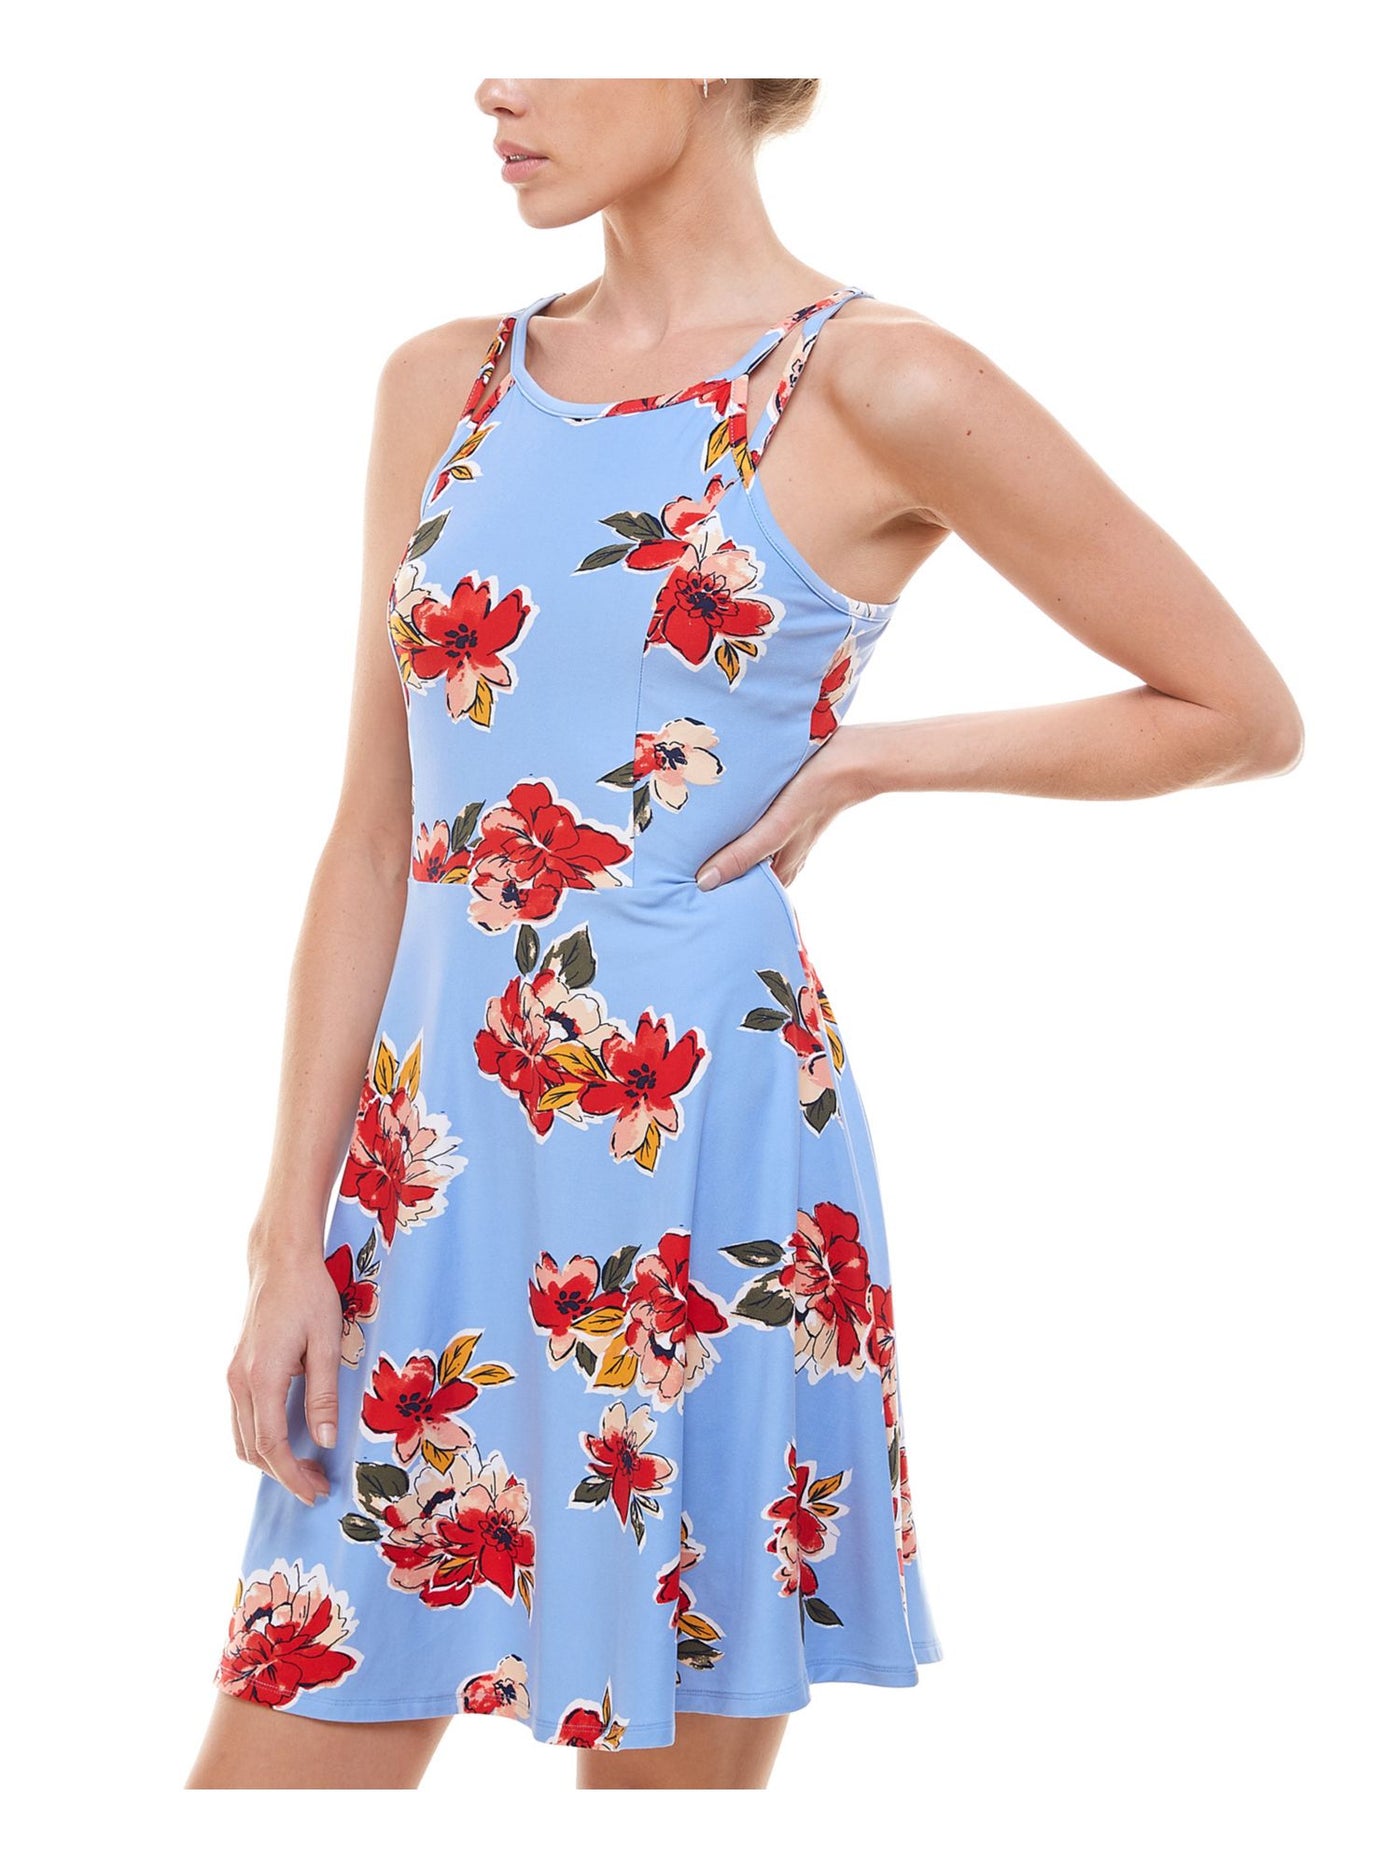 PLANET GOLD Womens Light Blue Stretch Floral Sleeveless Scoop Neck Above The Knee Party Fit + Flare Dress Juniors S